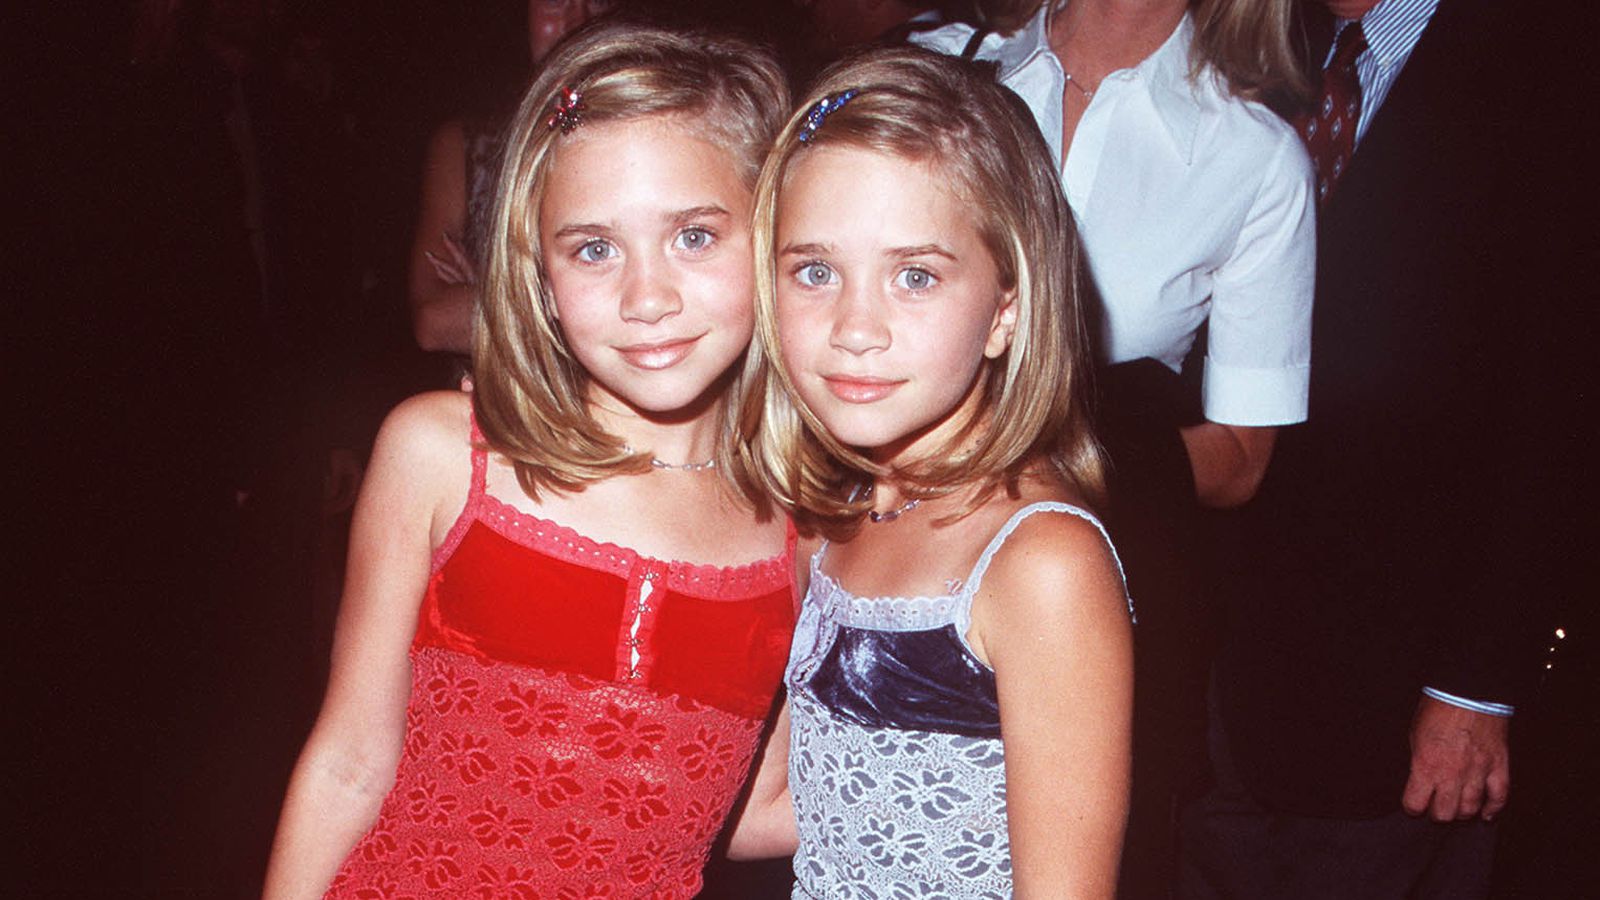 All The Trends Mary Kate And Ashley Olsen Have Started